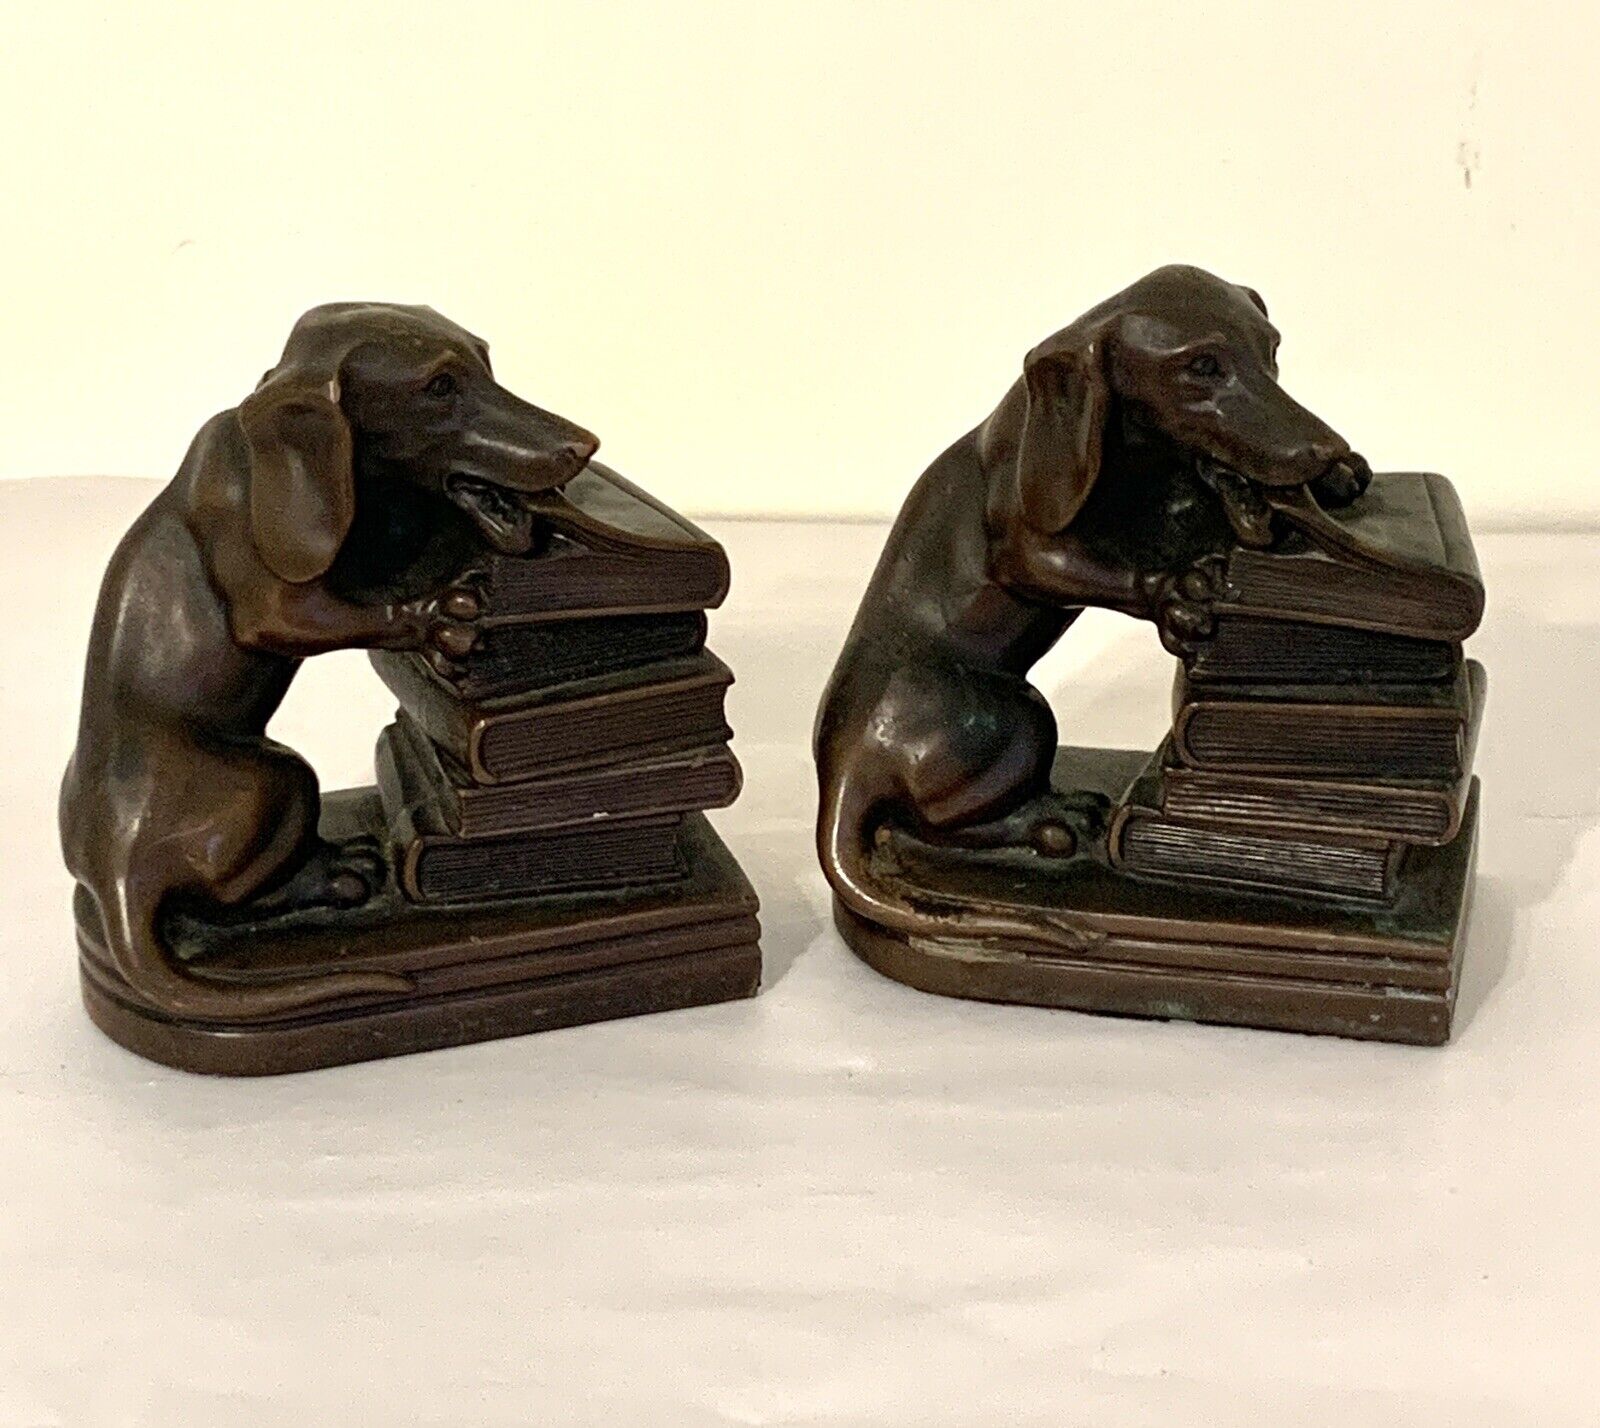 Vintage Jenning Bros Dachshund Bookends Signed JB 1700 Dog Chewing on Books